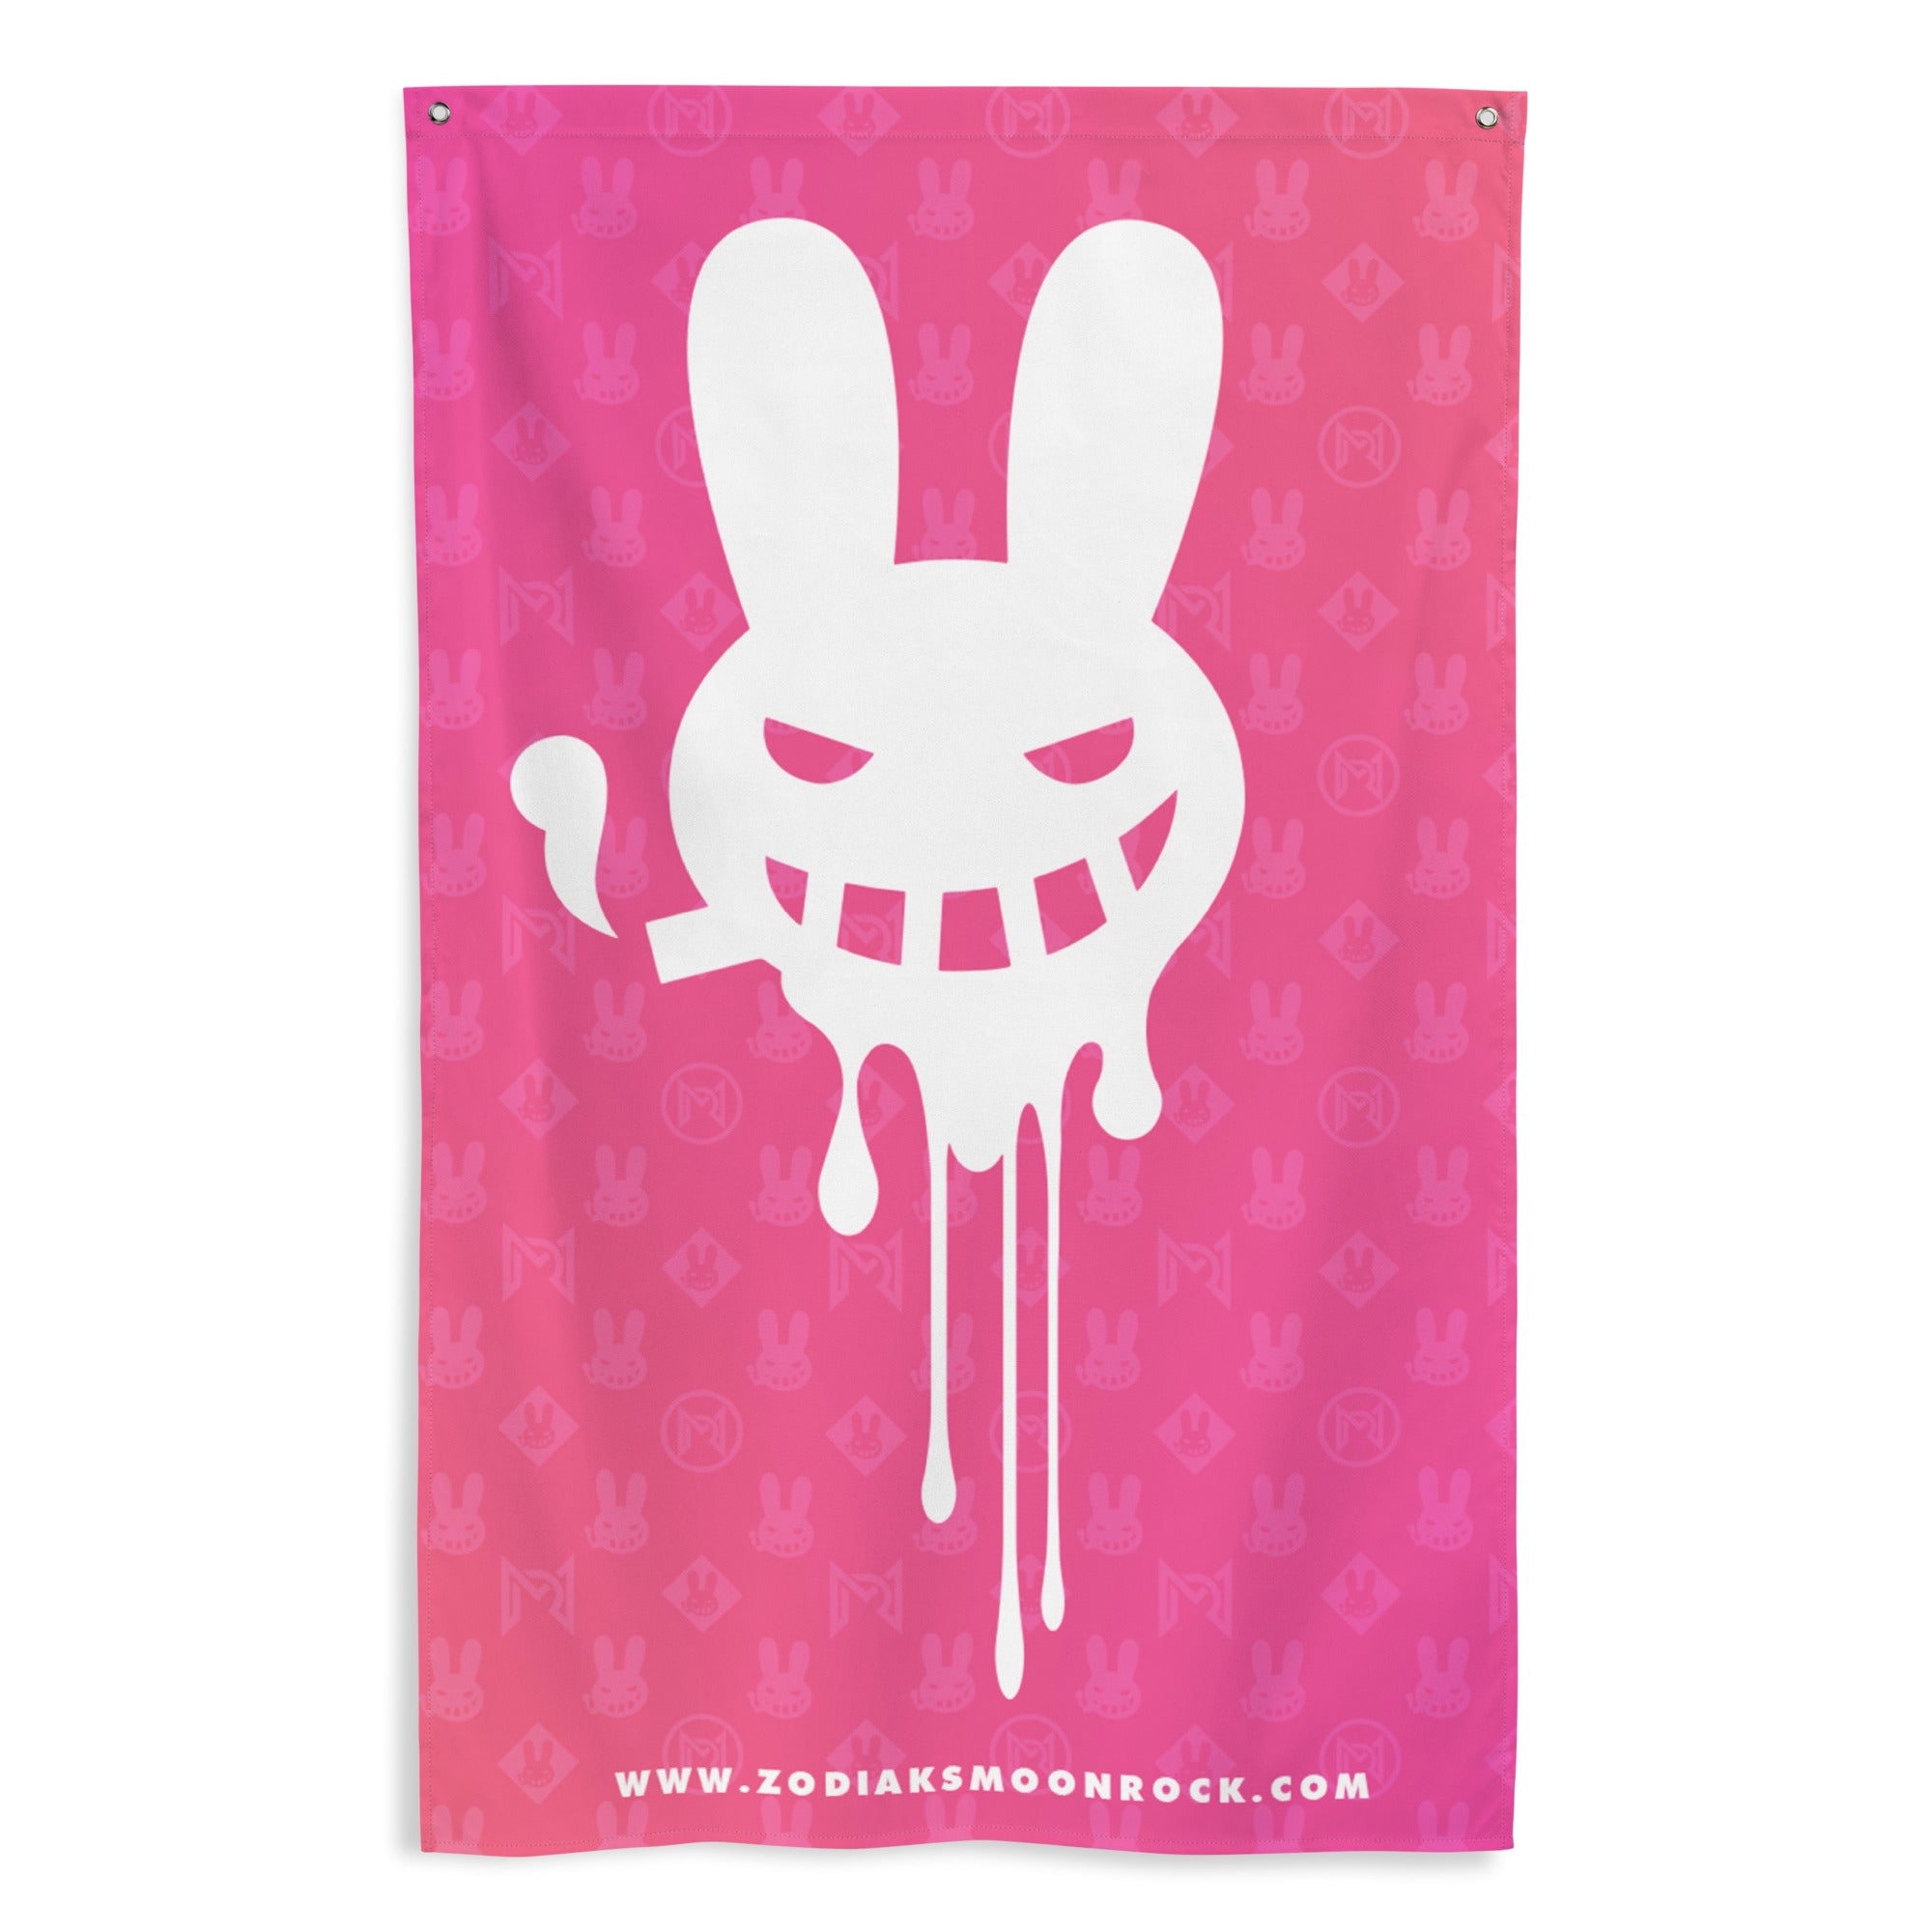 Dr. Zodiak's Moonrock - Dripping Bunny Pink - Flag - 34x56 *inches